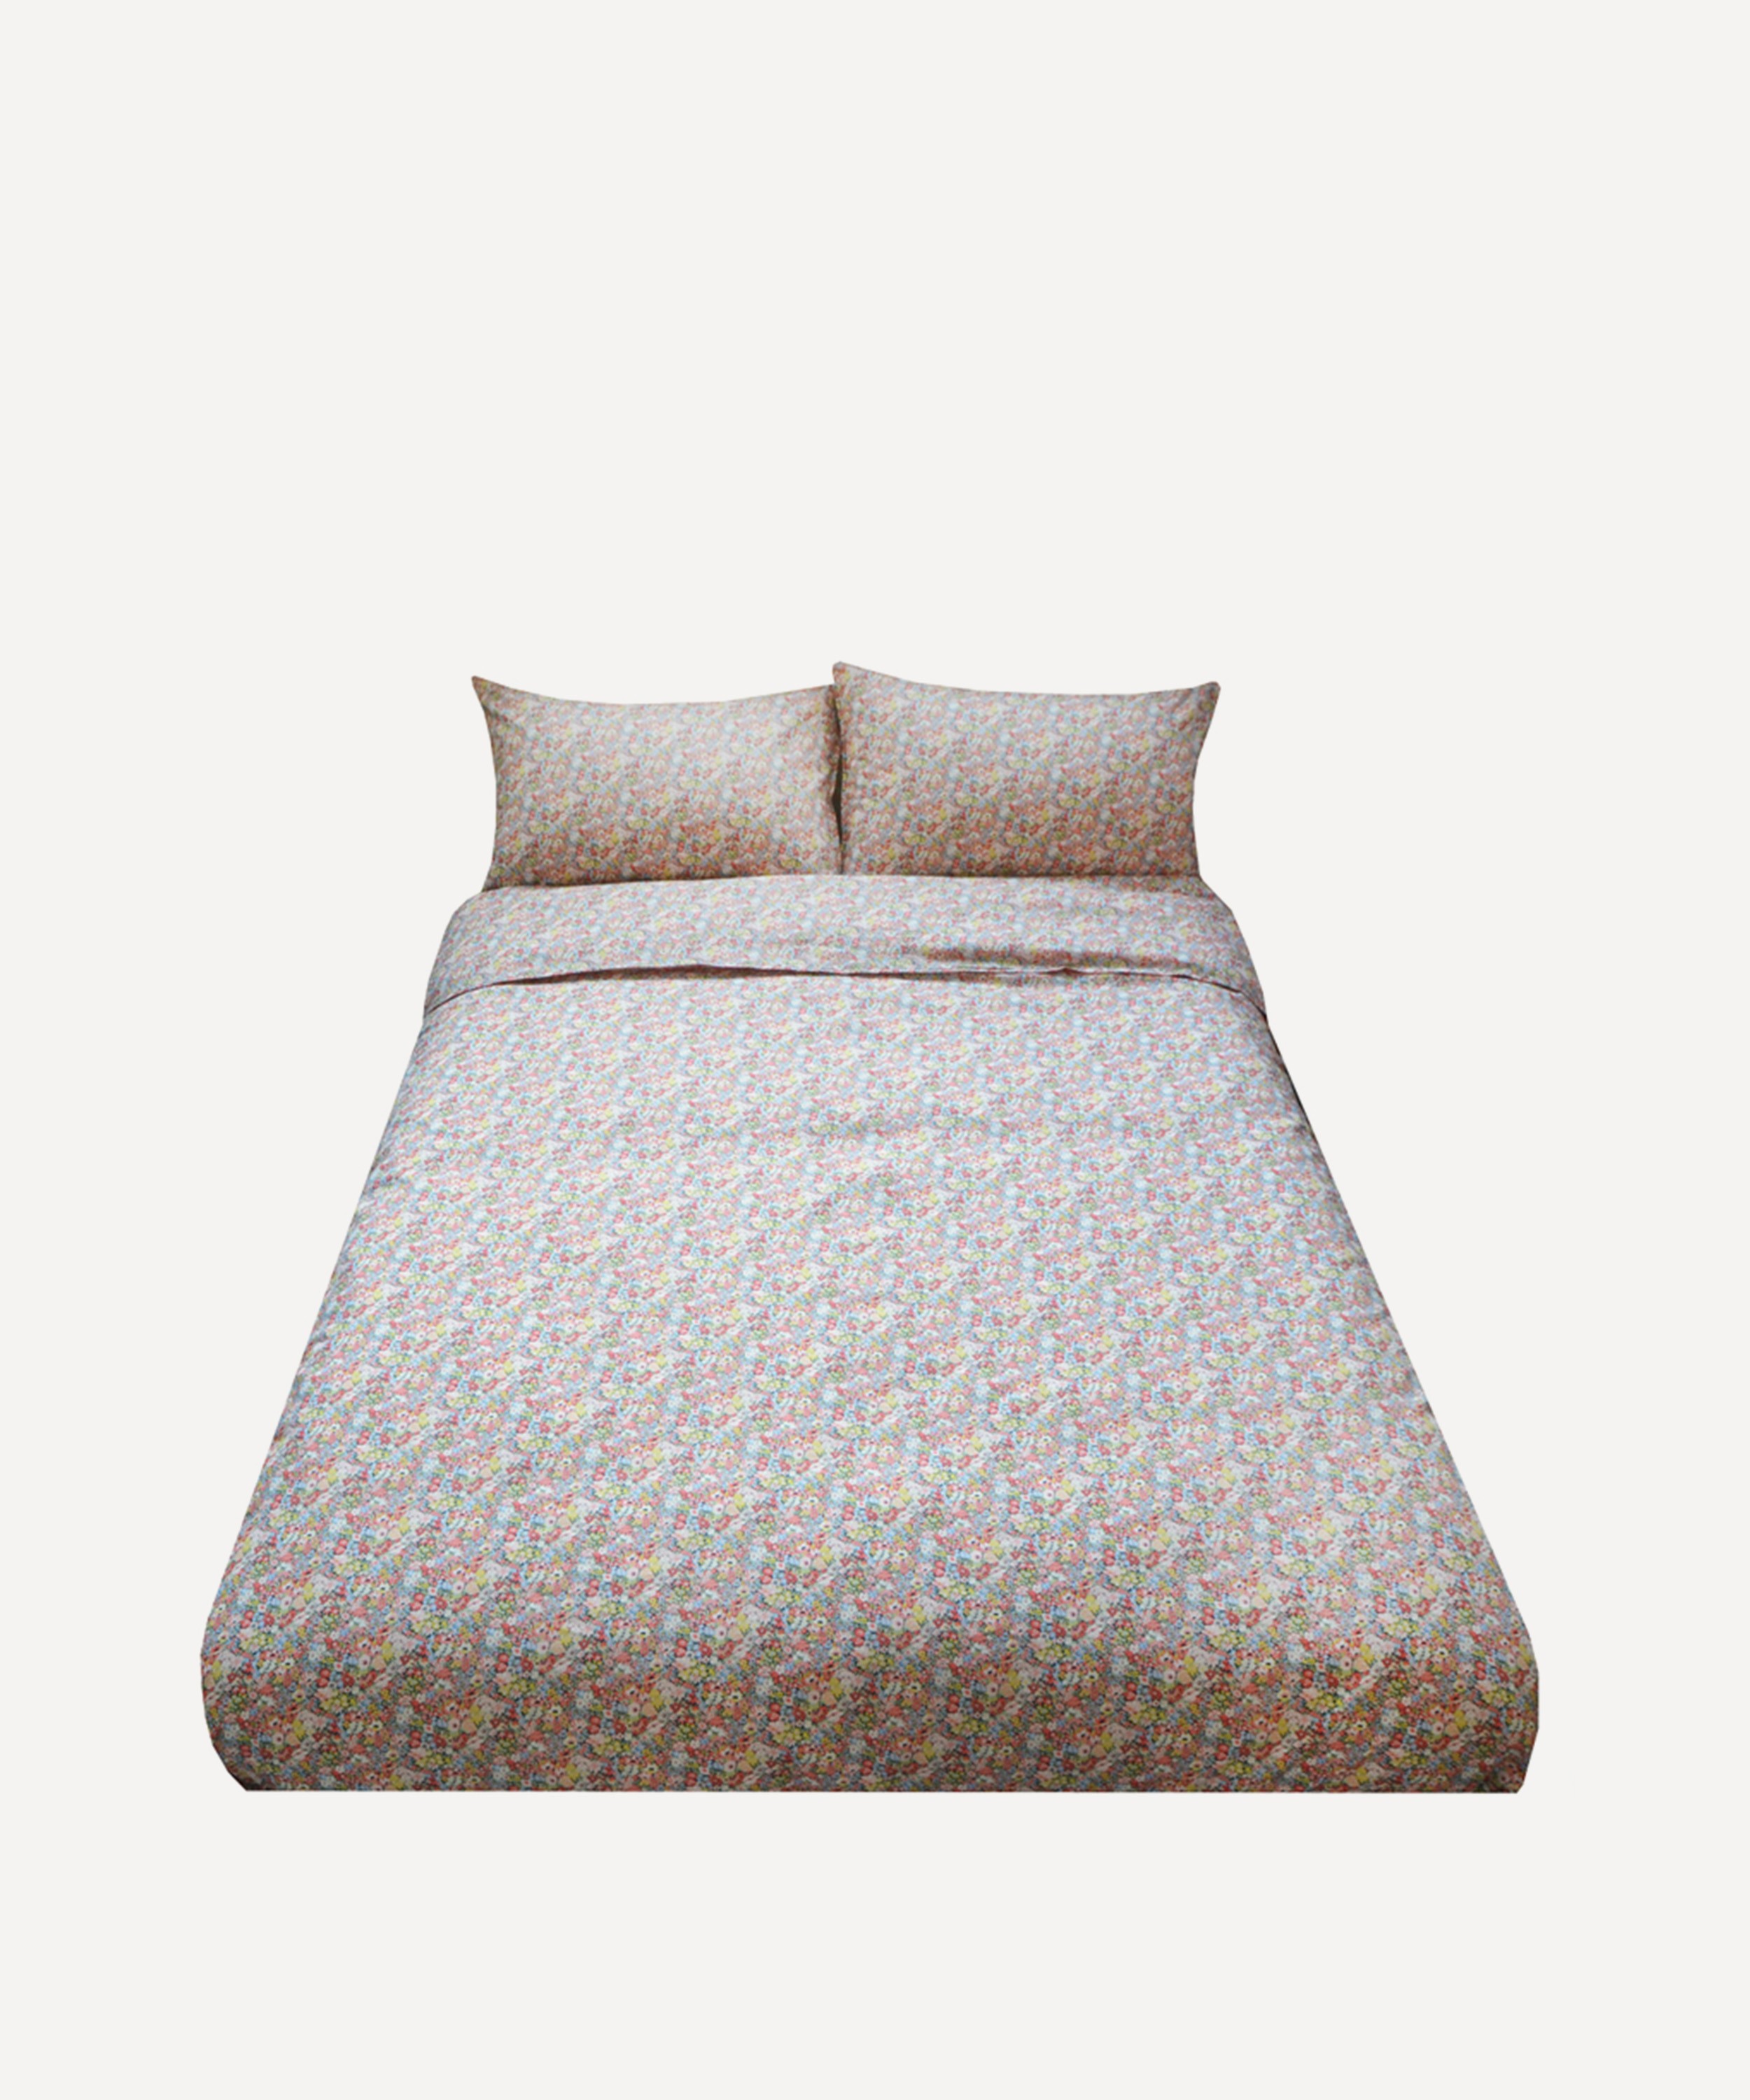 Coco & Wolf - Thorpe Hill King Duvet Cover Set